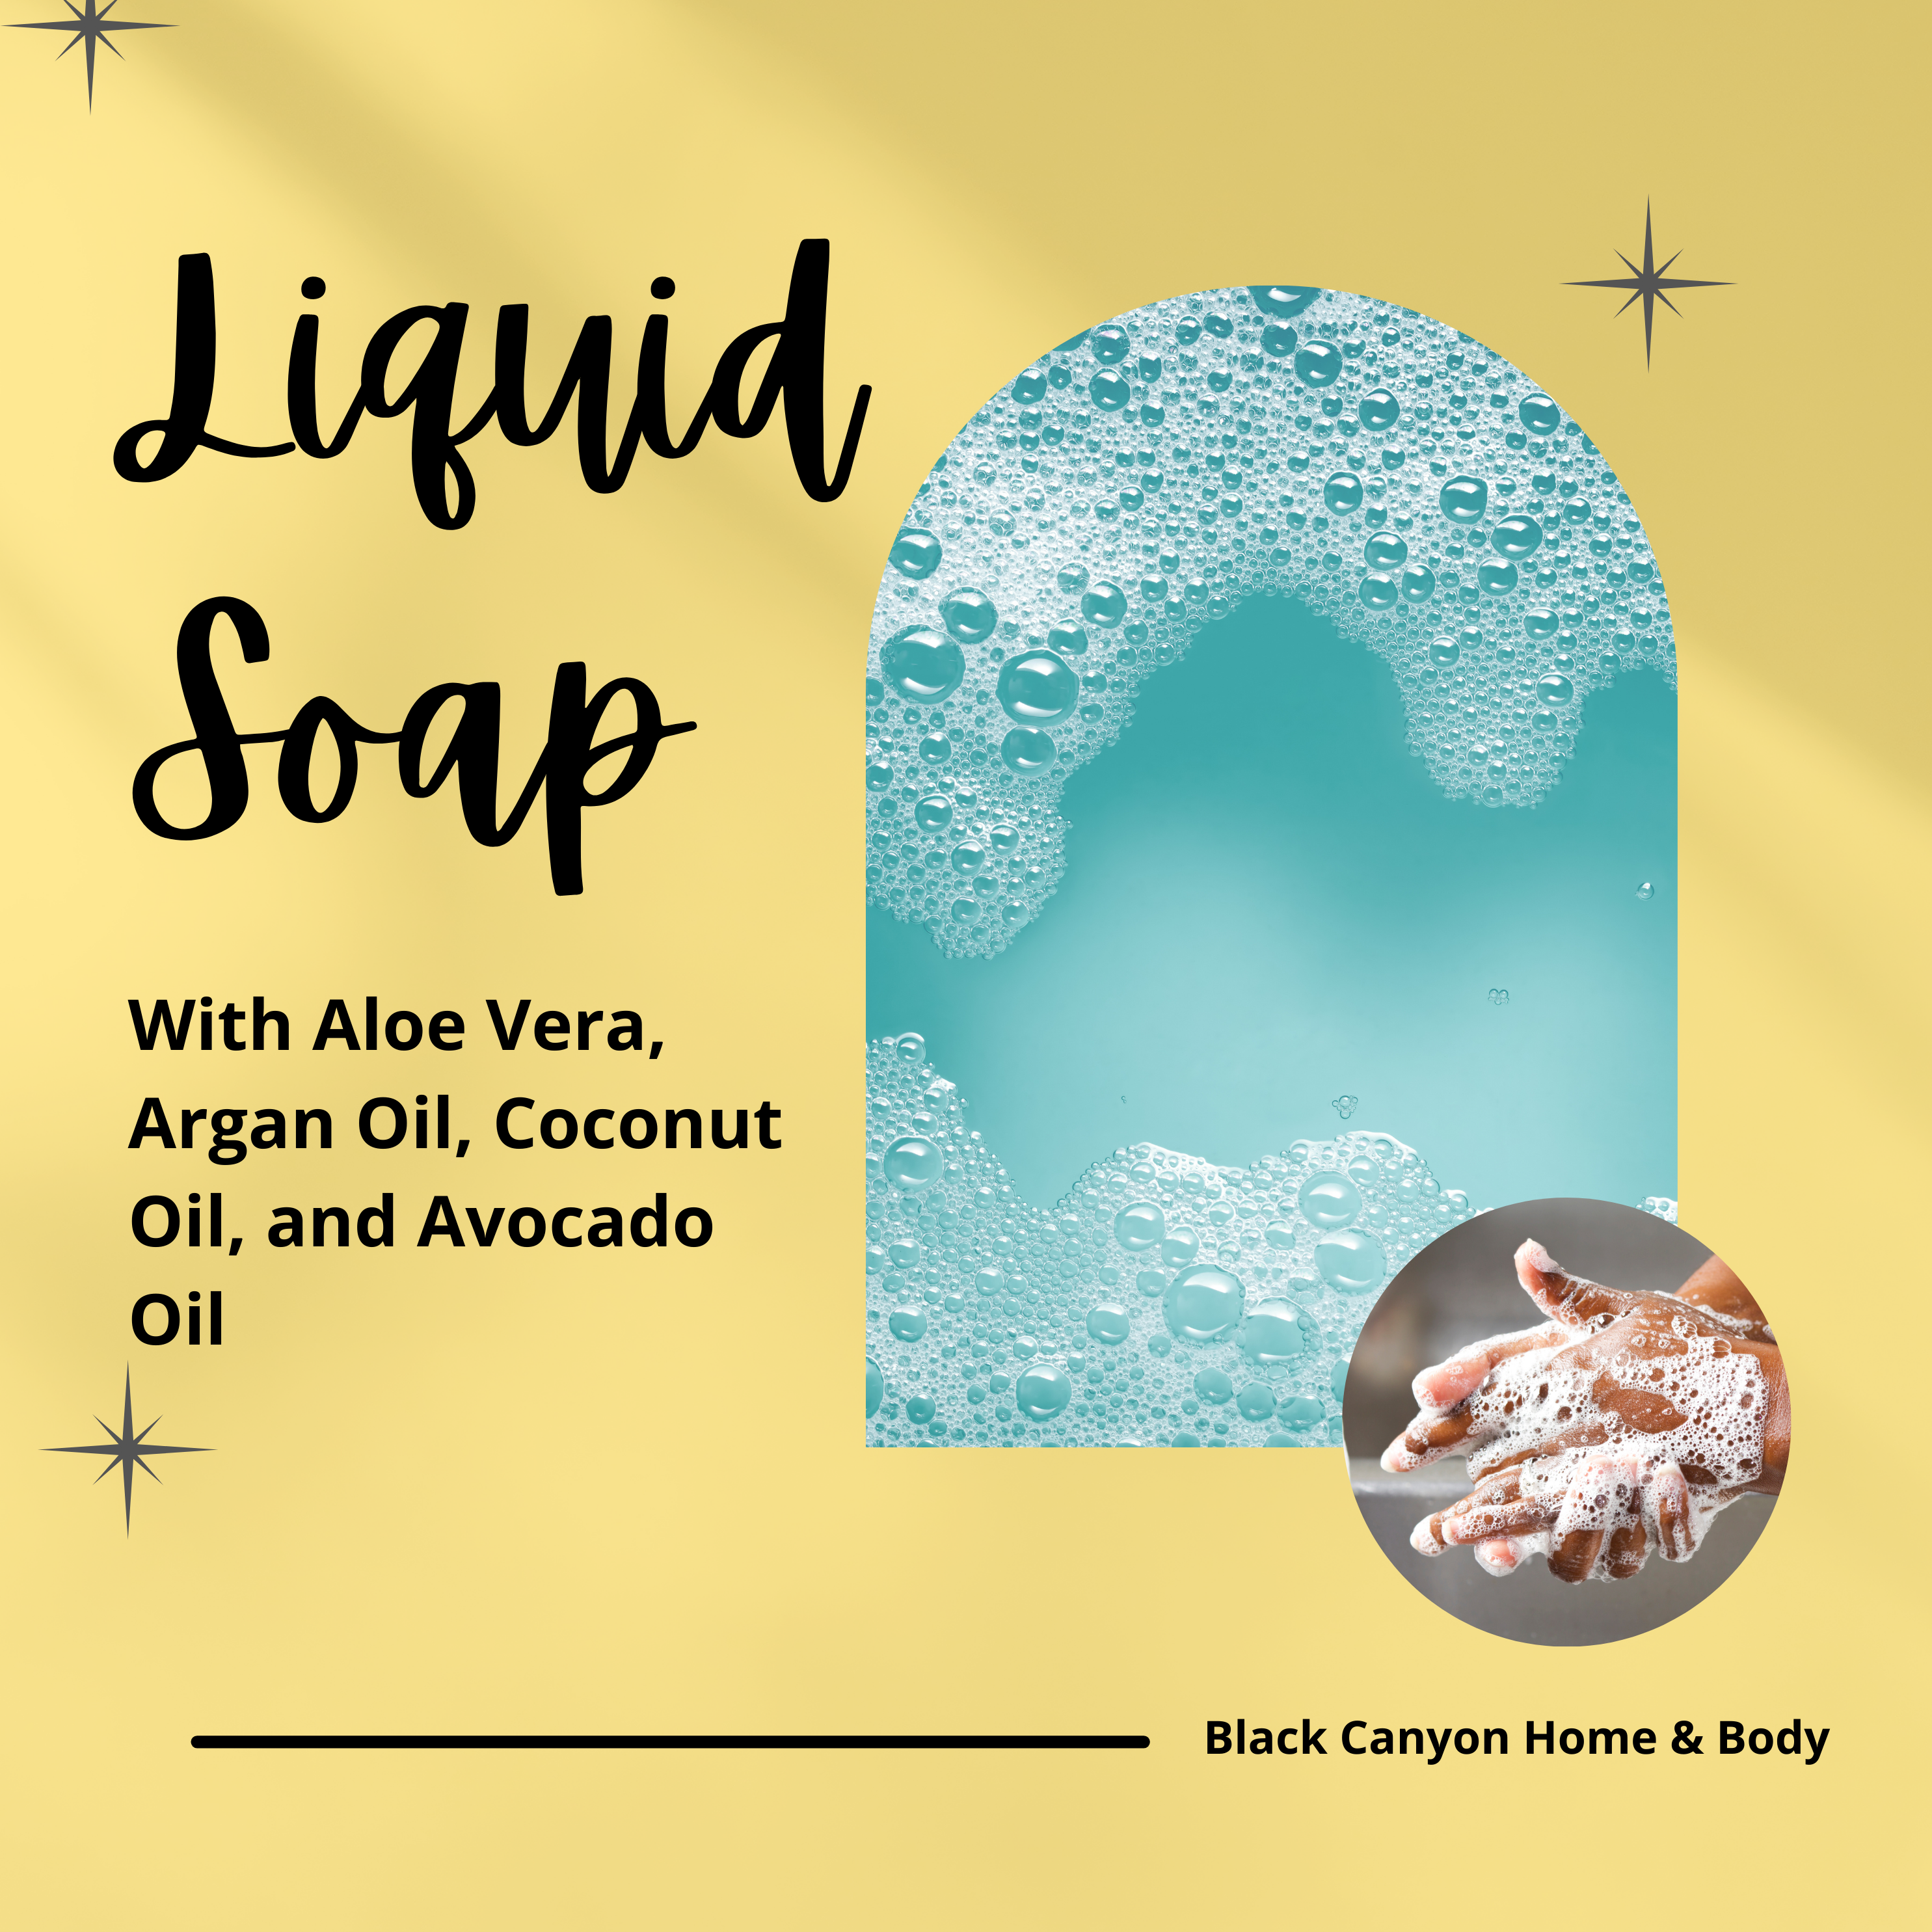 Black Canyon Angel Food Cake Scented Liquid Hand Soap